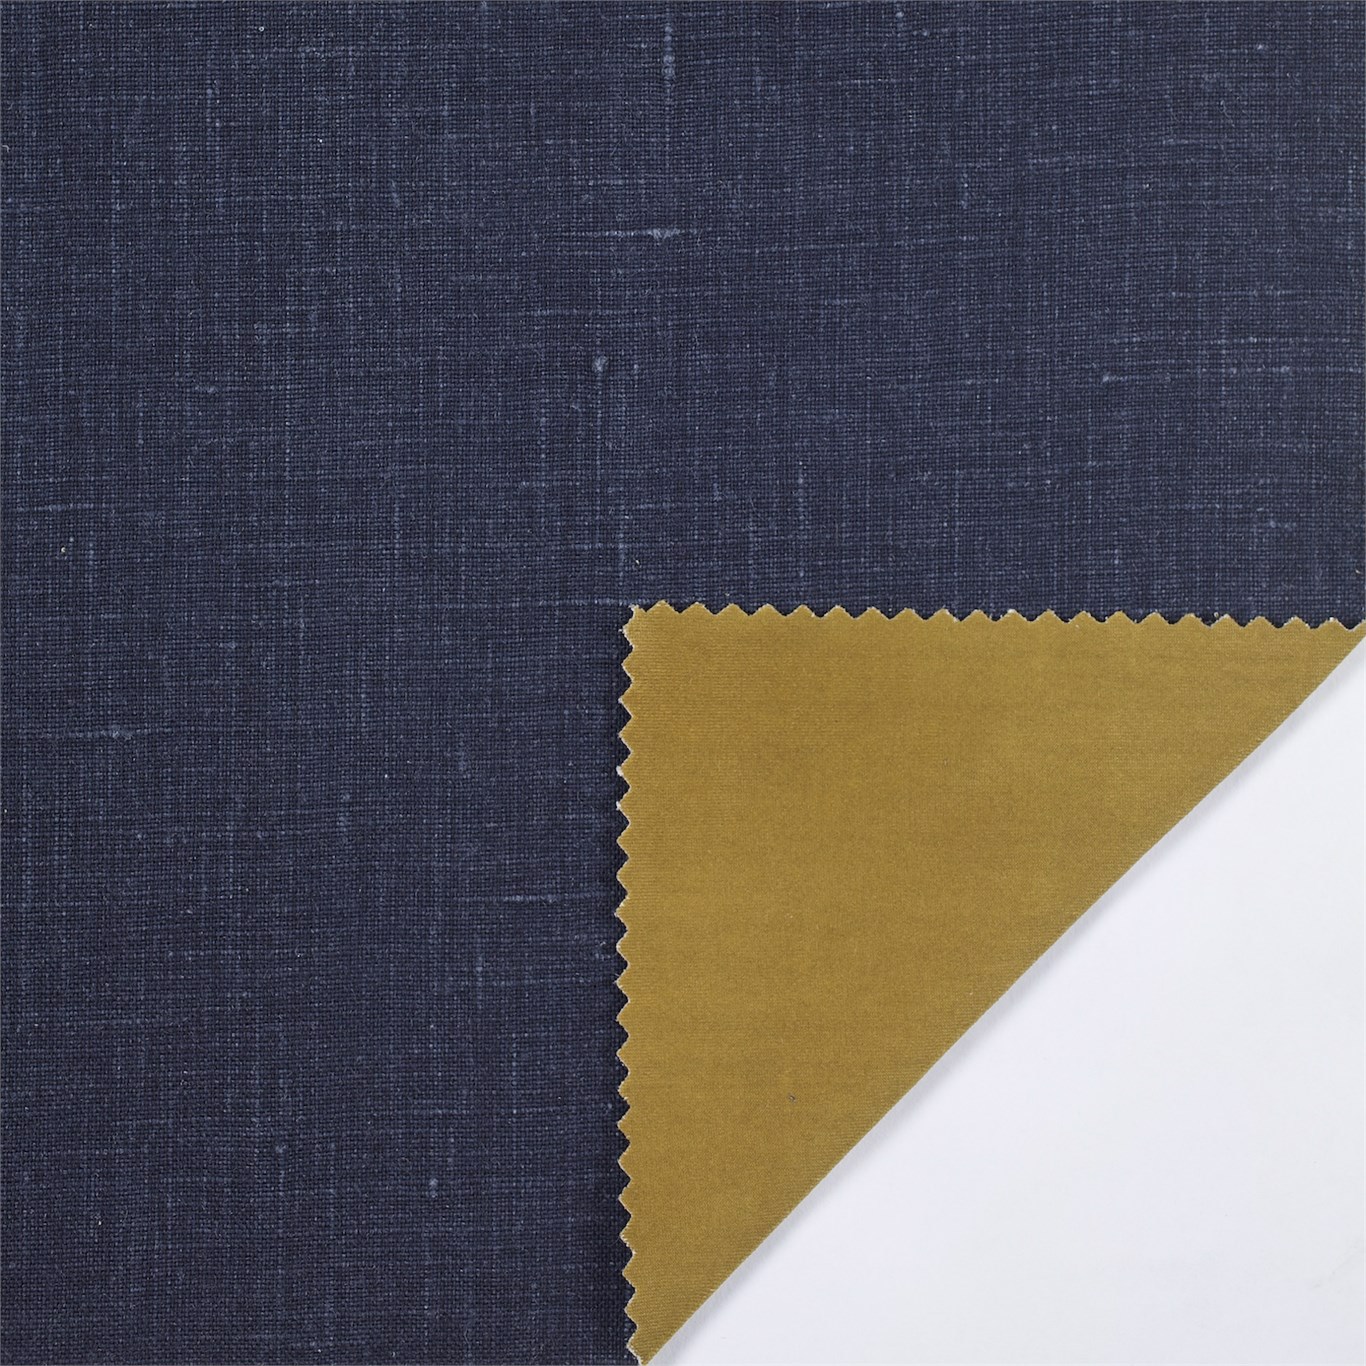 Mika Chartreuse/Denim Fabric by HAR